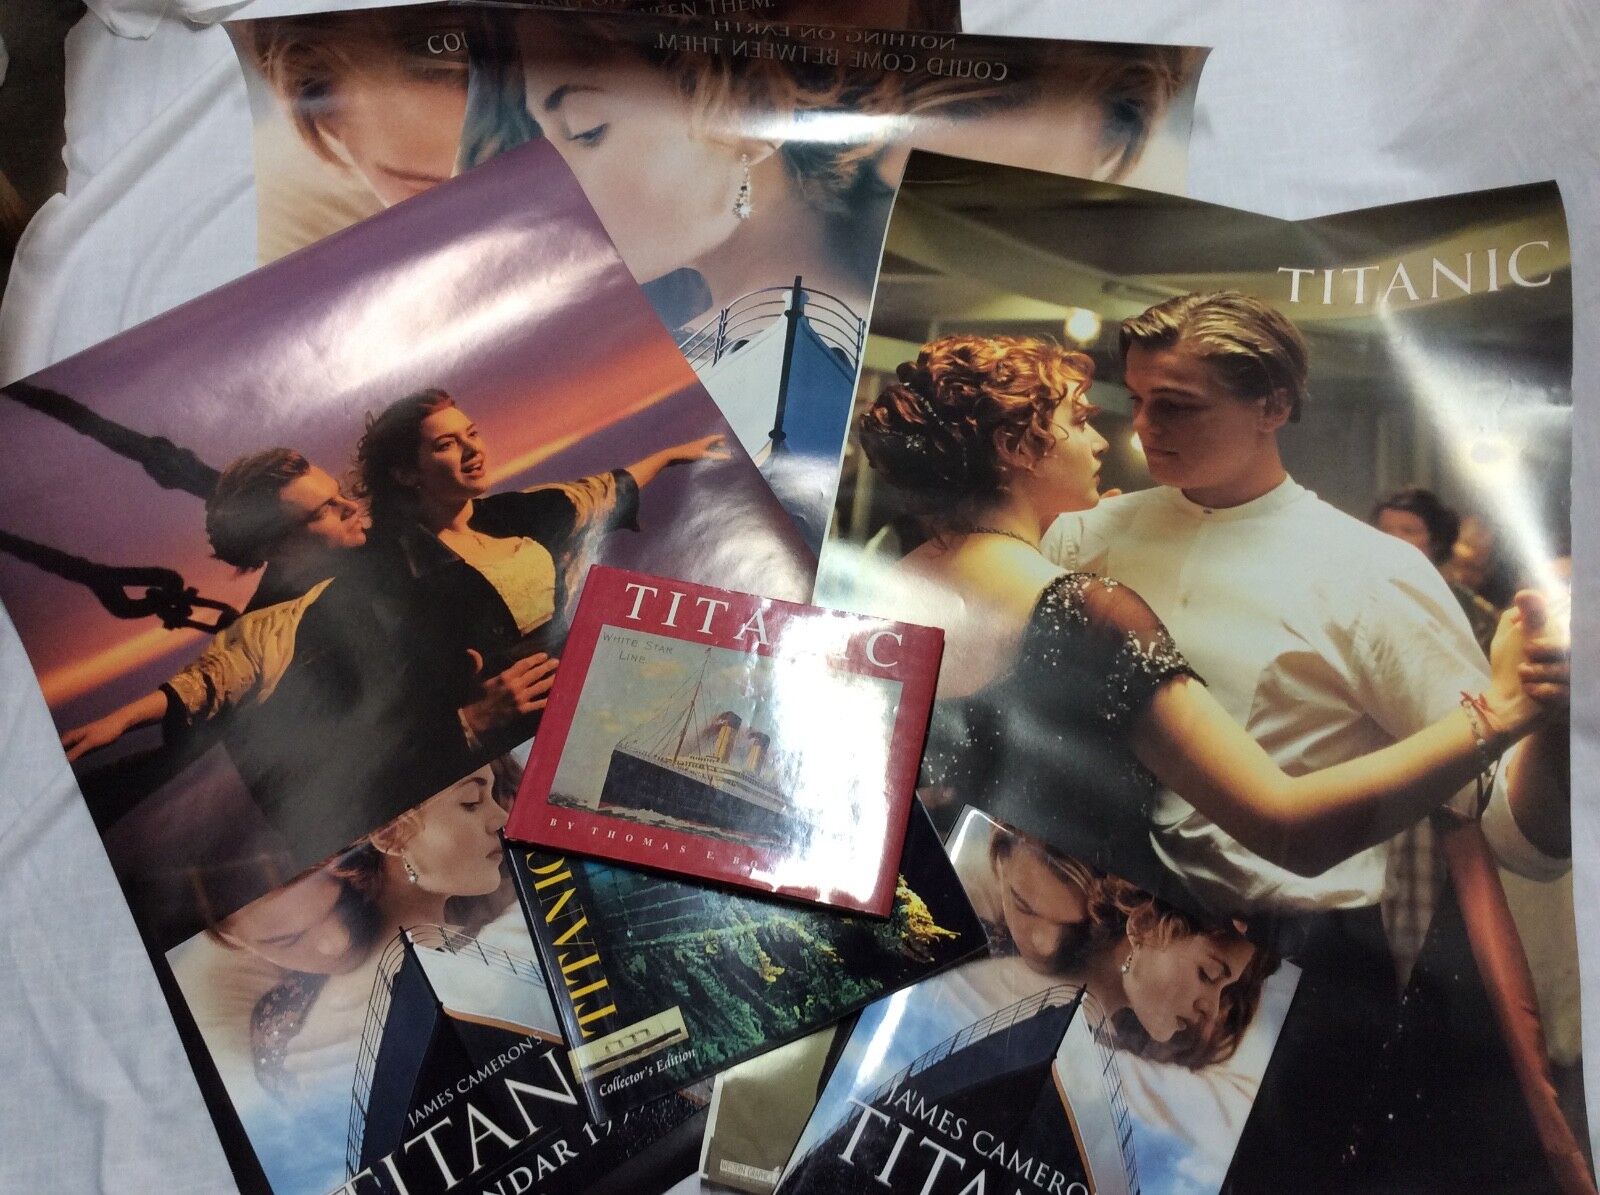 Titanic lot - a 1999 Calendar 5 posters (one is double sided) 2 books 1 leaflet Без бренда - фотография #2